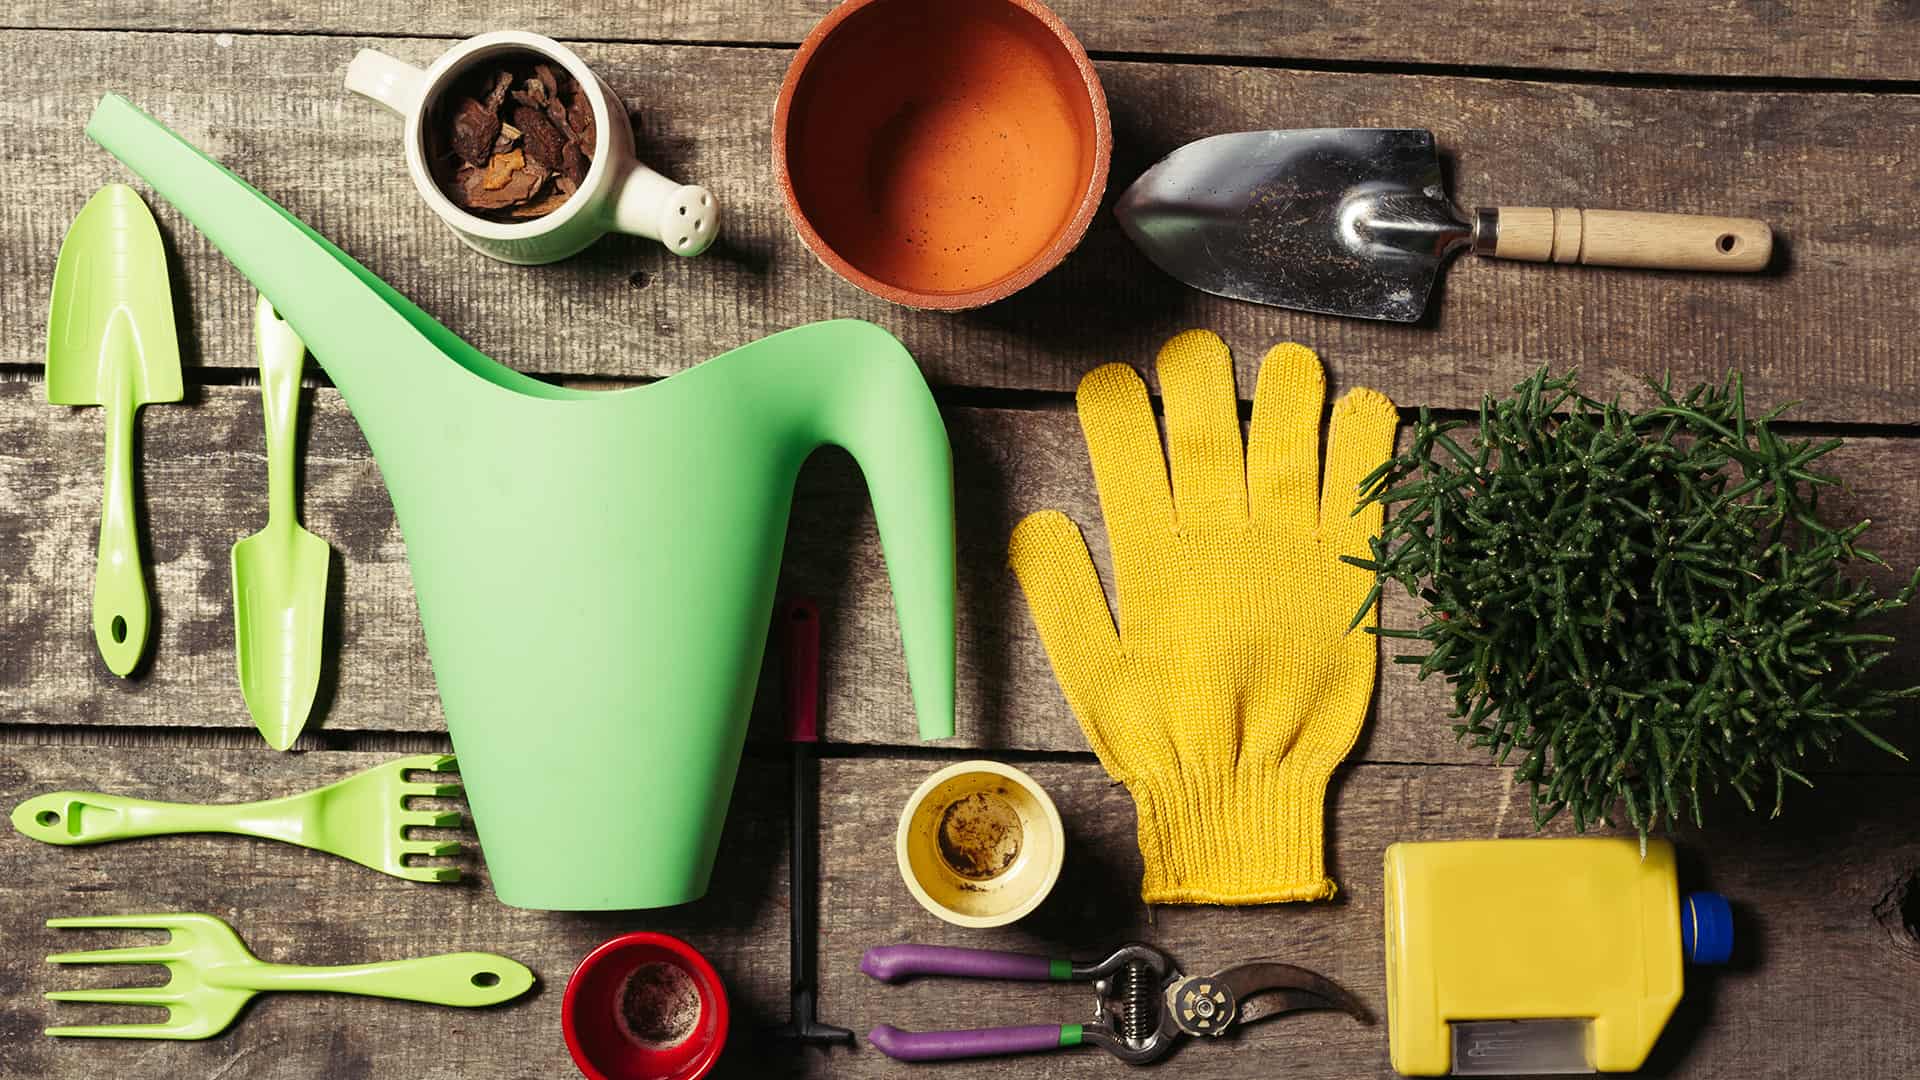 Are you using the right garden tools?